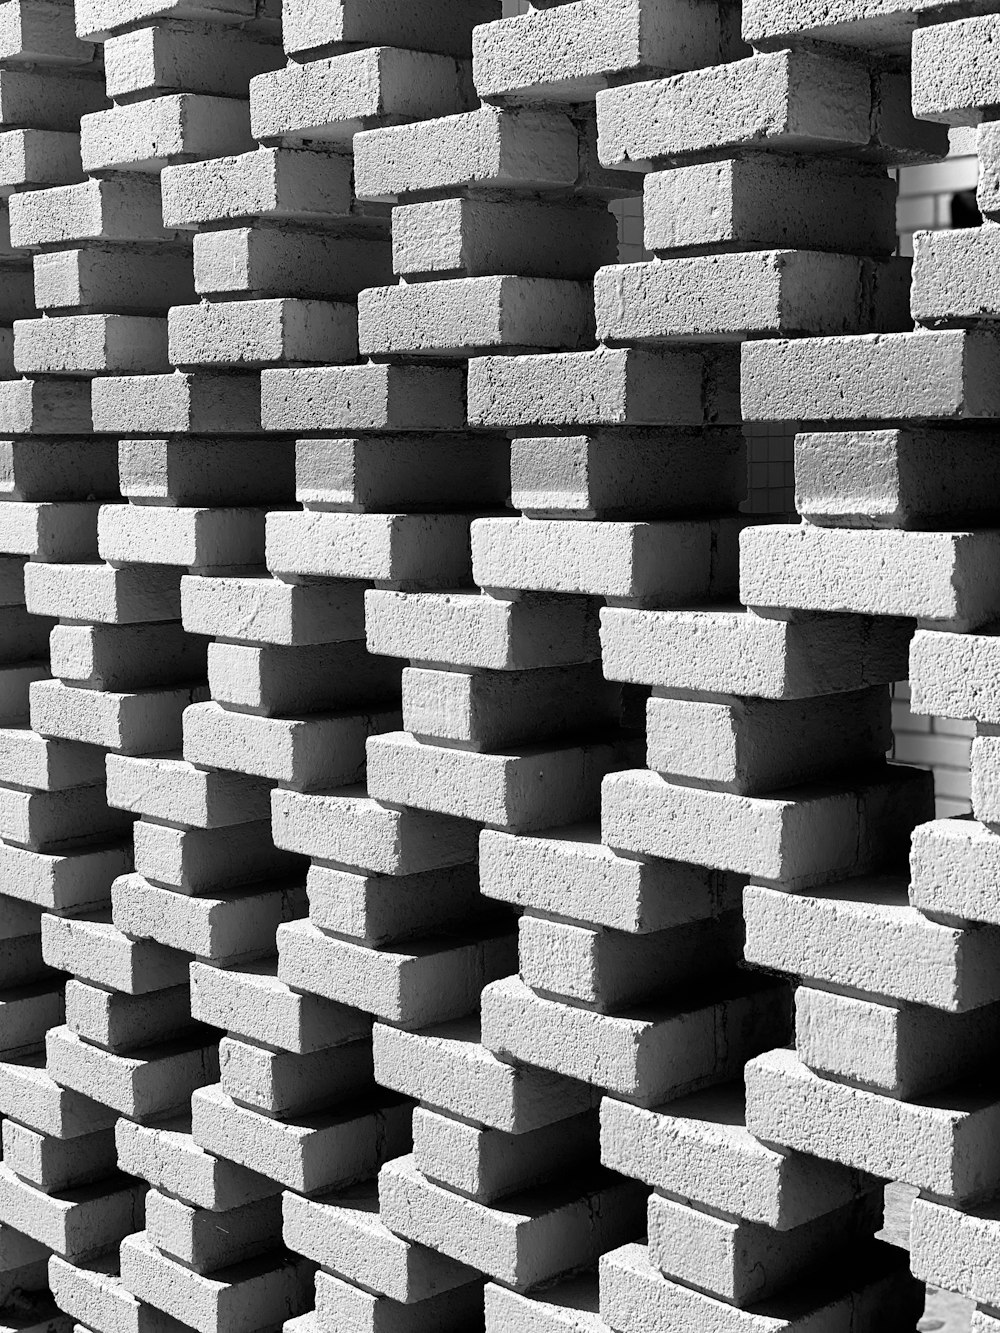 black and white photograph of a stack of bricks